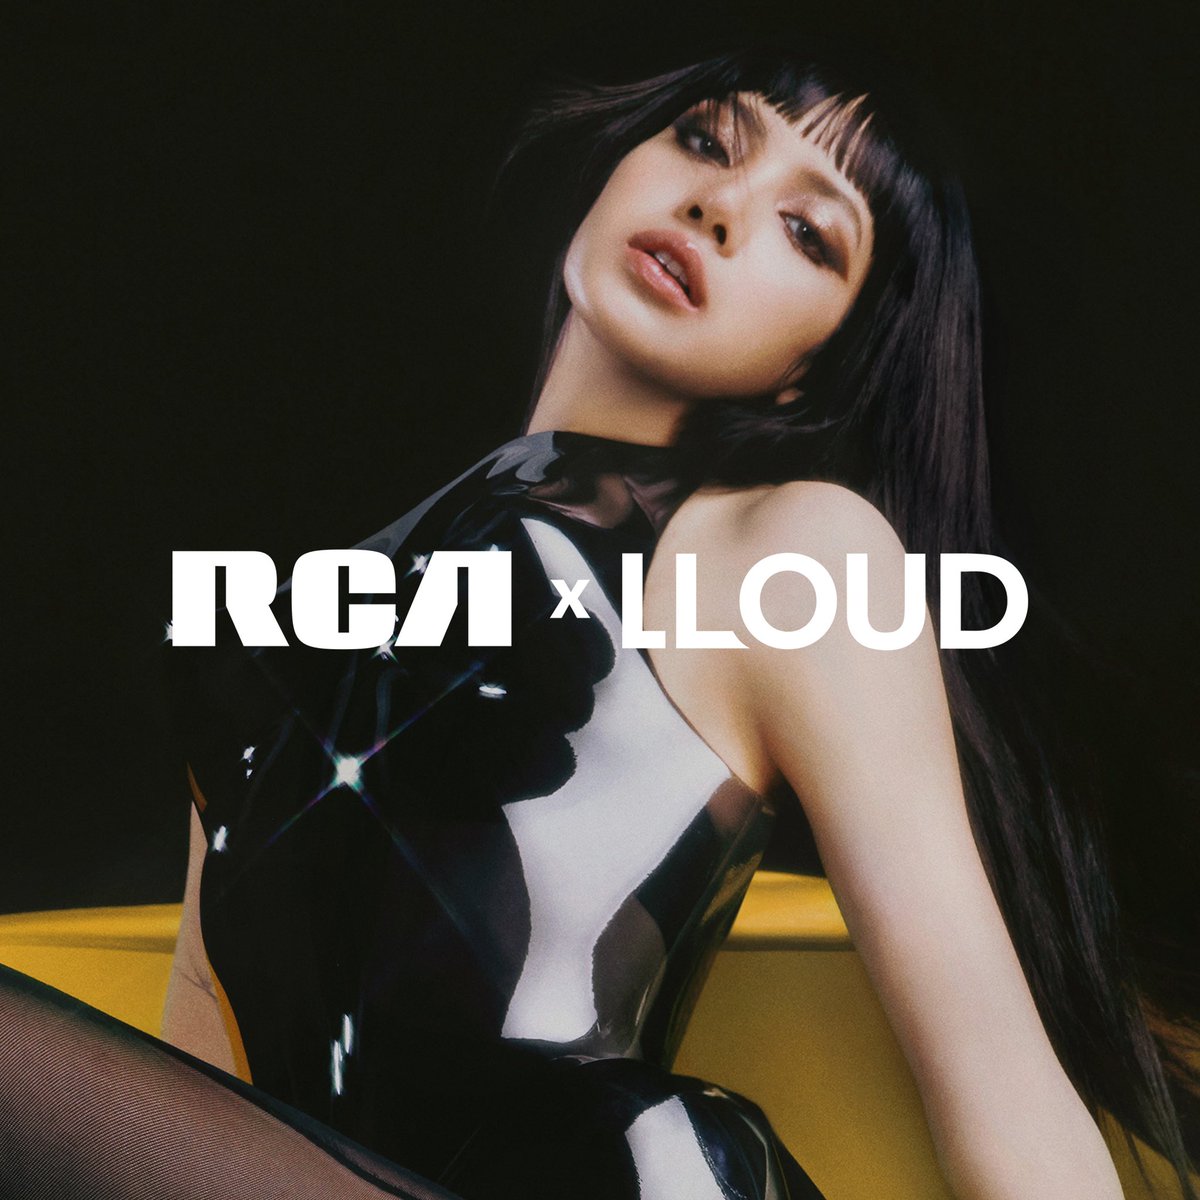 BLACKPINK’s Lisa has signed to RCA in partnership with her label LLOUD.